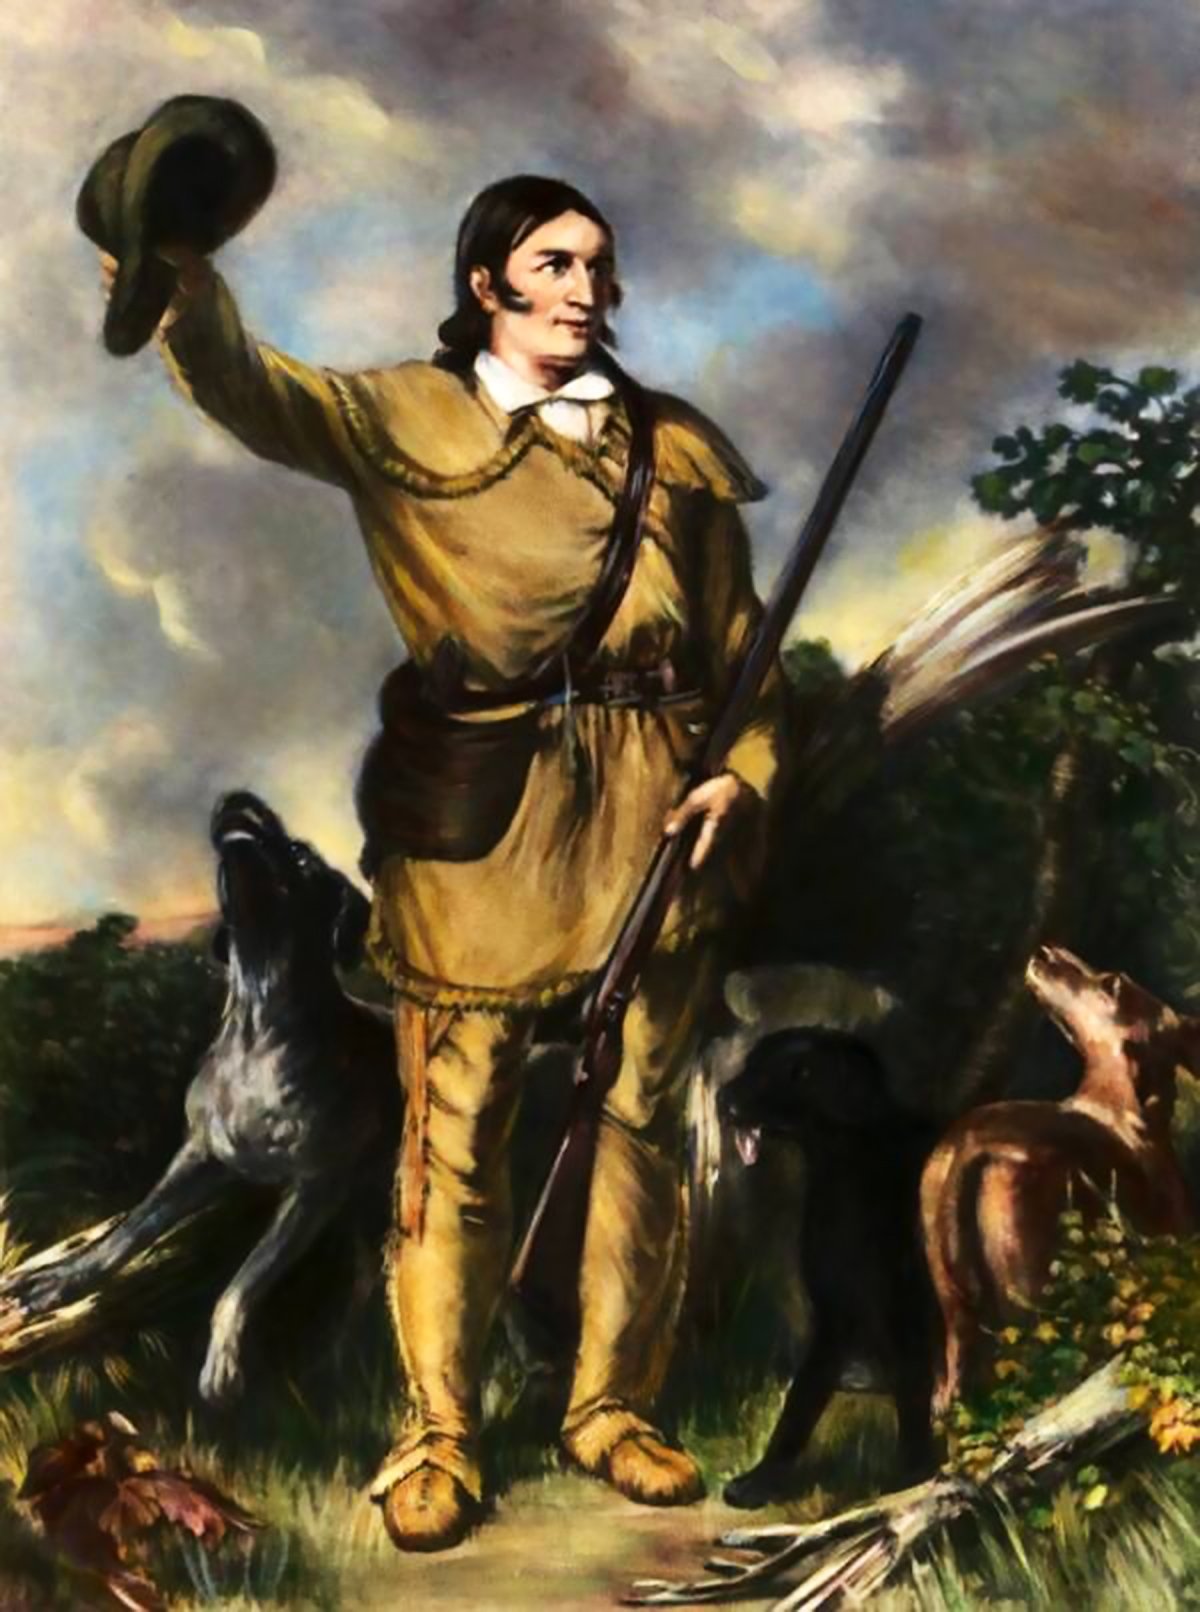 An 1839 painting by John Gadsby Chapman depicting Davy Crockett in a golden-hued outfit, holding his hat aloft in one hand and a rifle in the other. He stands amidst a wilderness scene with three dogs by his side, and lush greenery and fallen branches surrounding him against a cloudy sky backdrop.